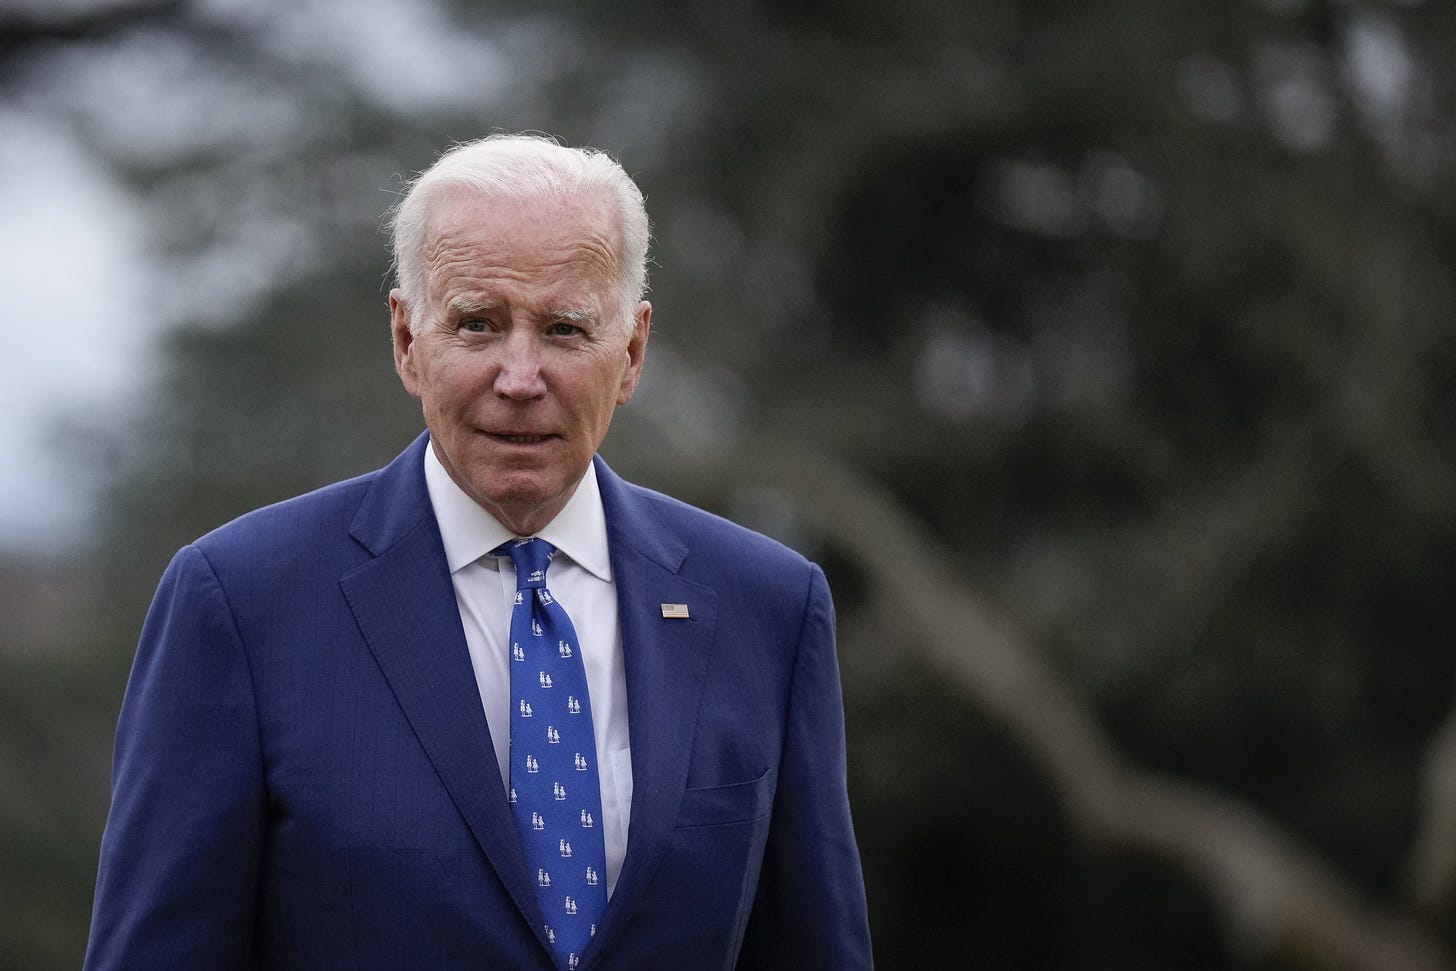 Why Joe Biden Was Not Raided by the FBI Over Classified Documents